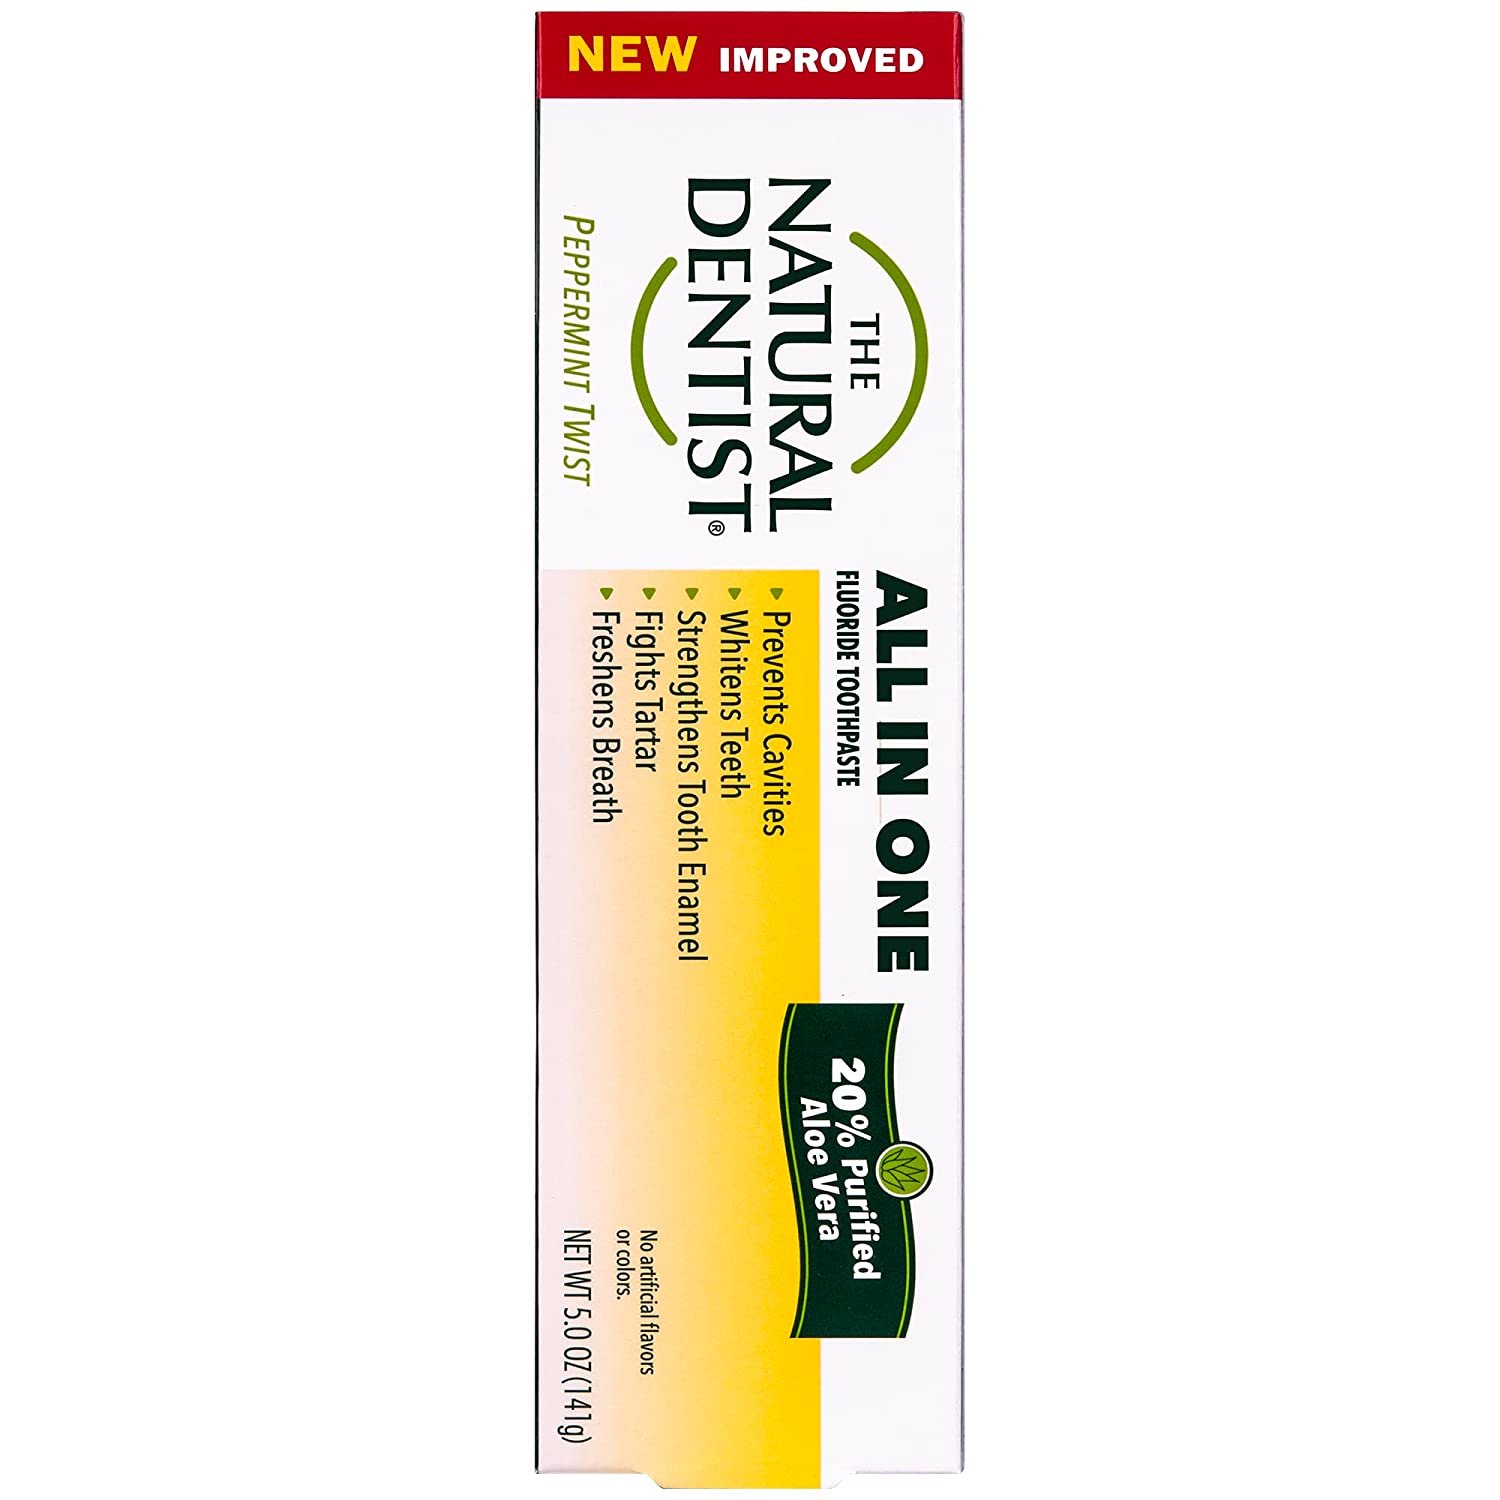 The Natural Dentist All-In-One Fluoride/Sulfate-Free Toothpaste with Aloe, Peppermint Twist Flavor, 5 Ounce Tube